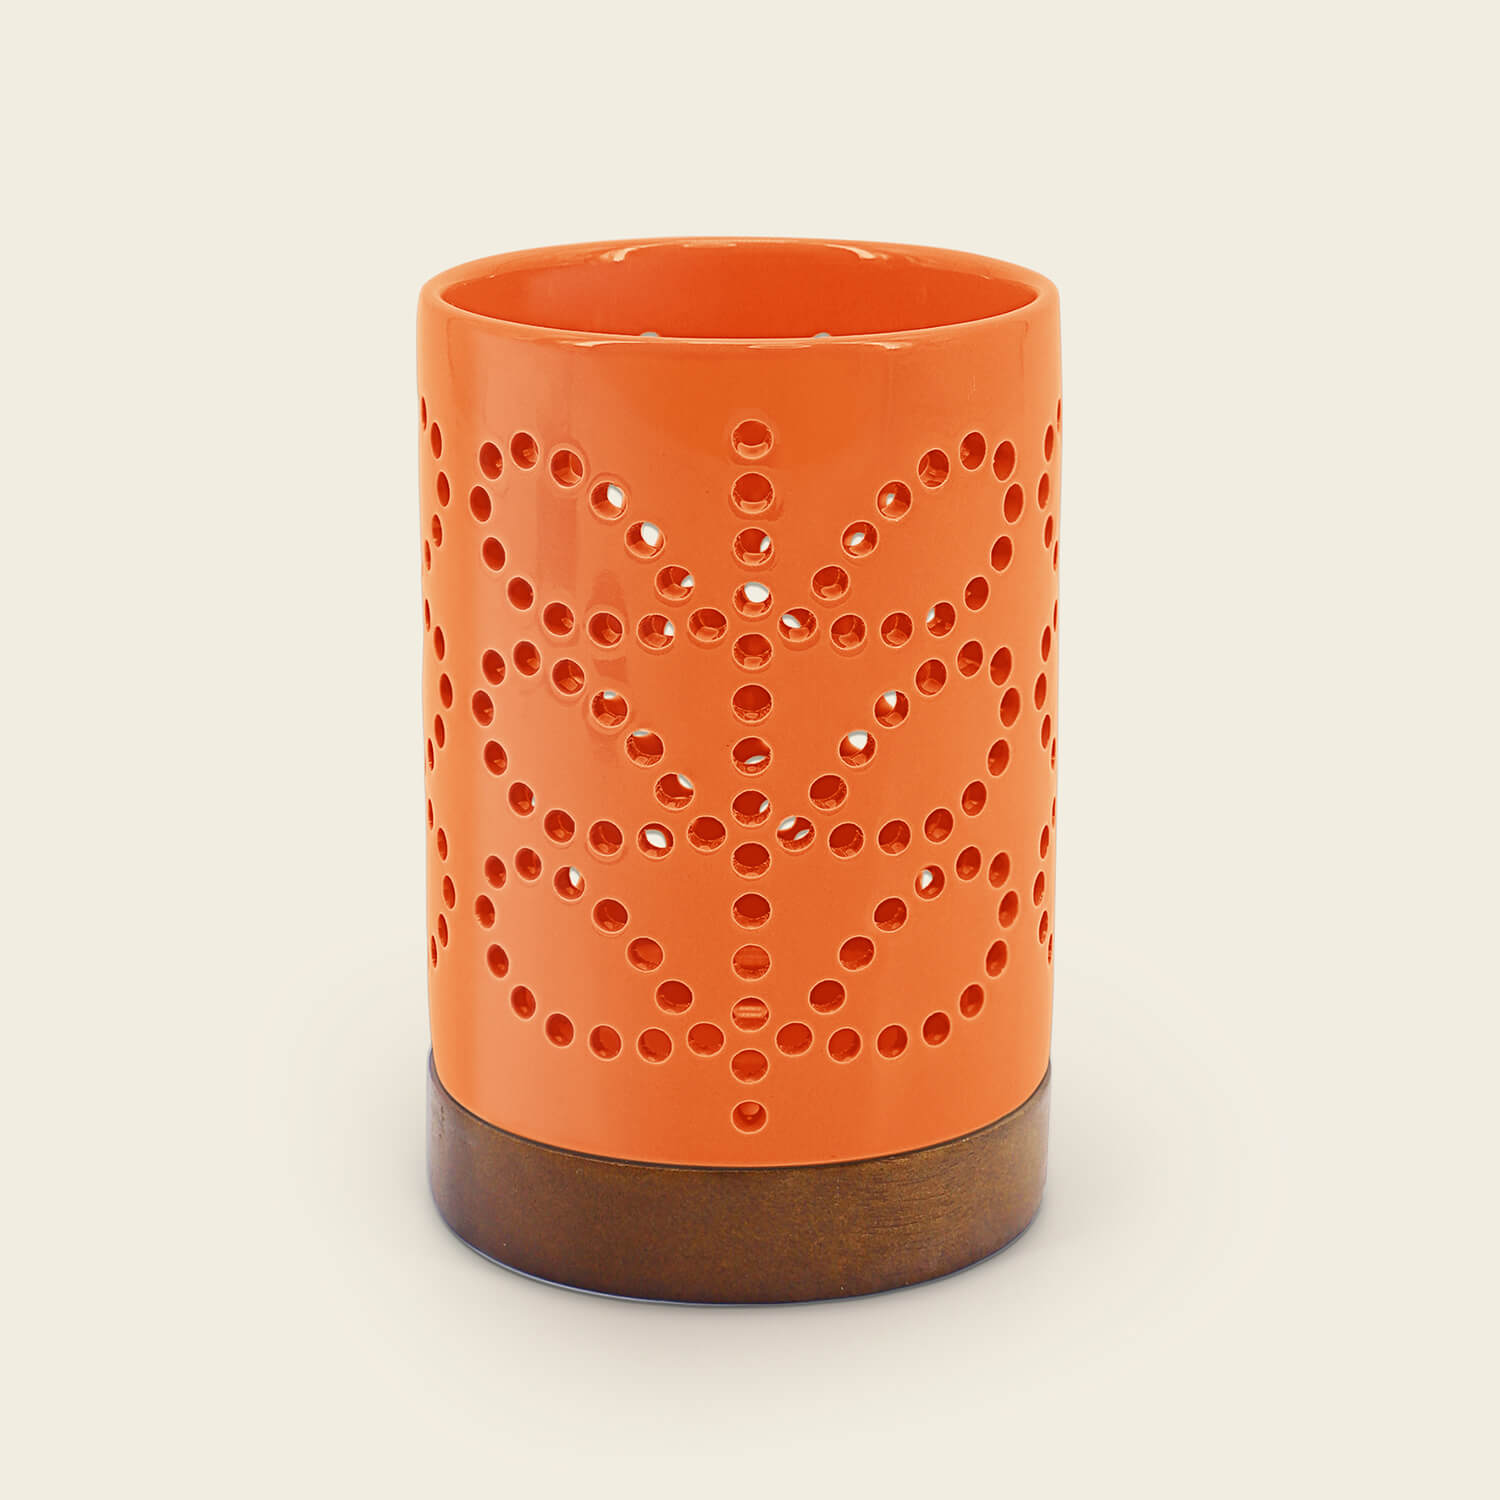 Orla Kiely Ceramic Candle Holder - Linear Stem Persimmon 1 Shaws Department Stores